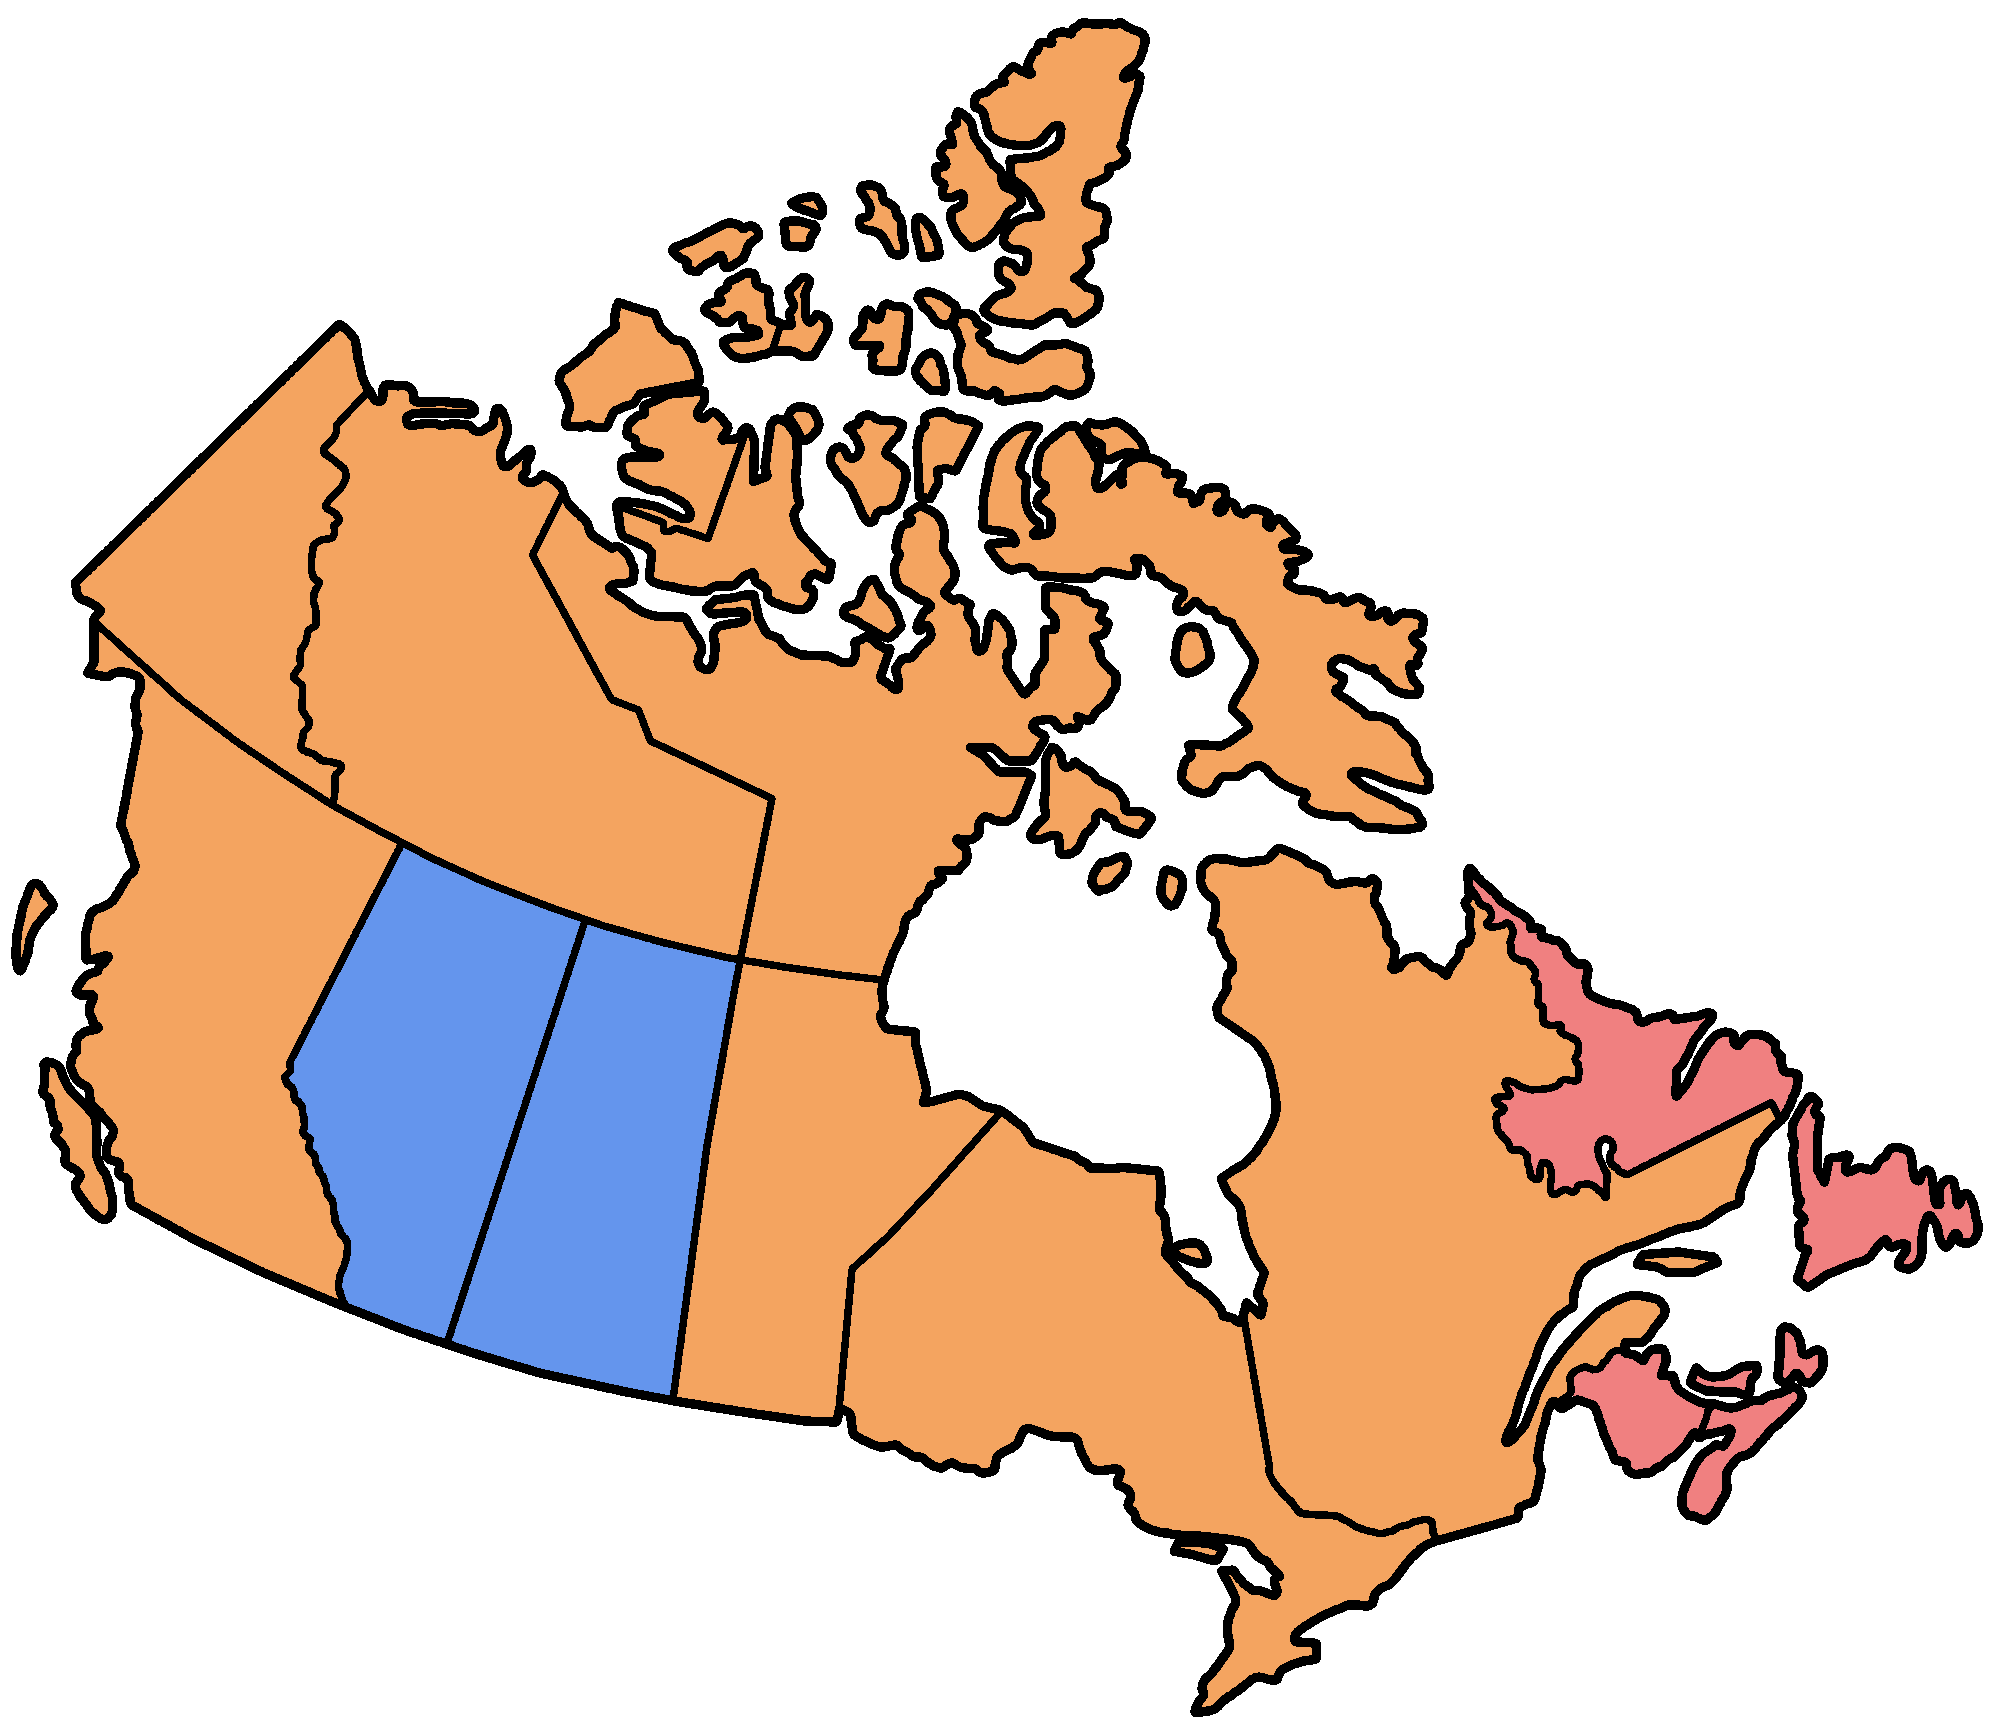 Canada_provinces_blank[1].png